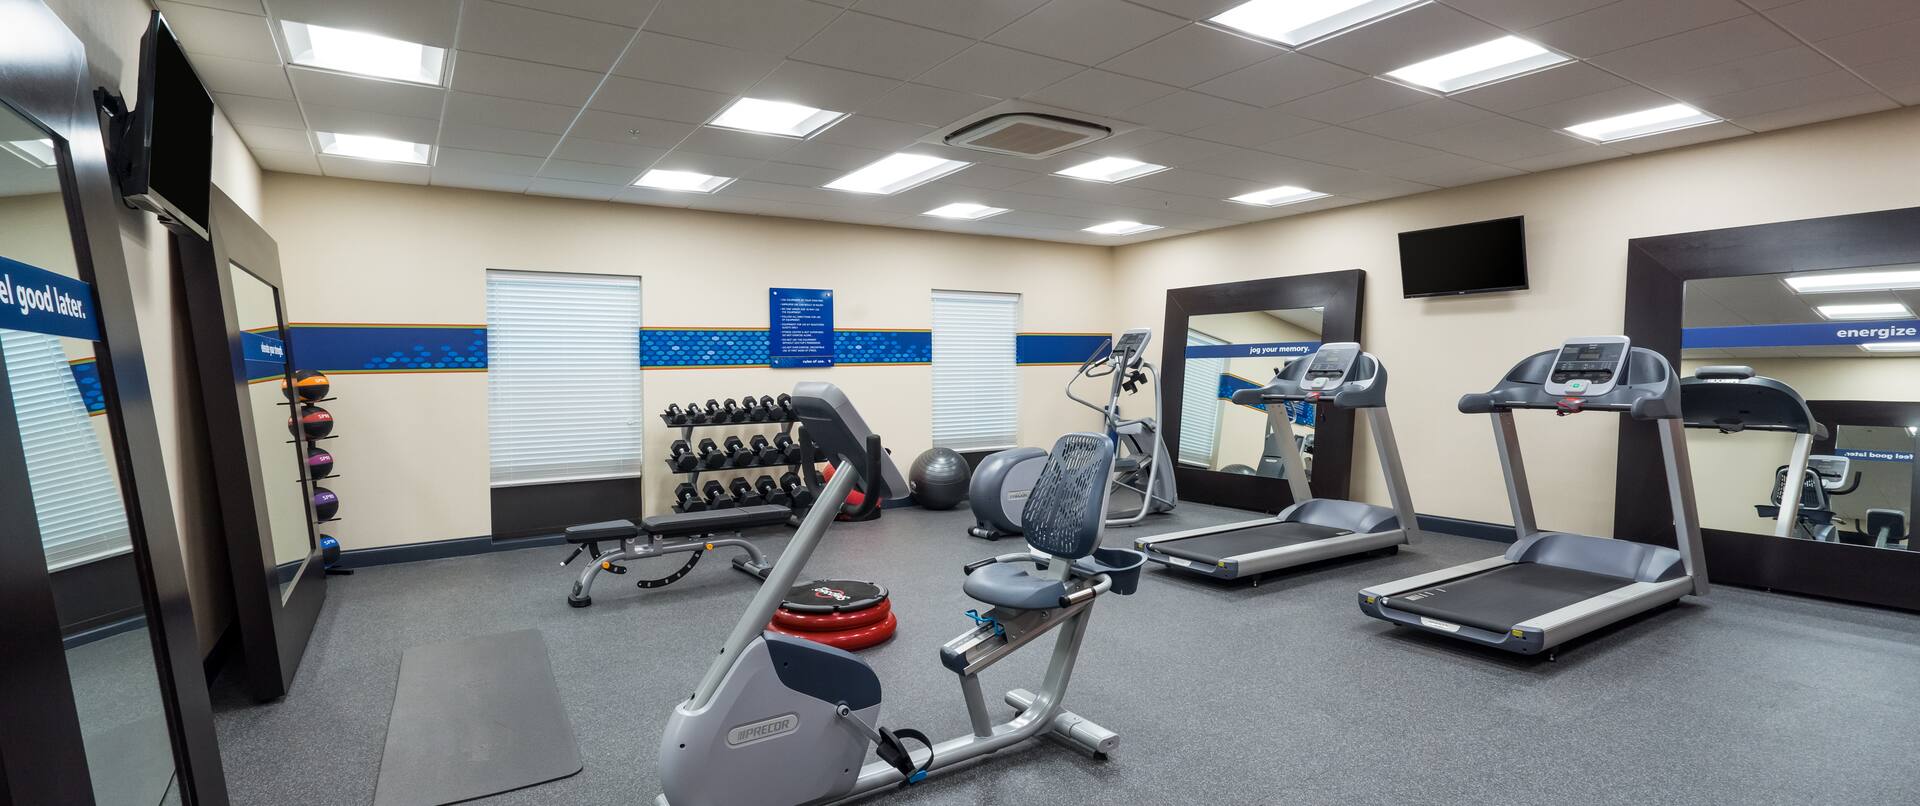 Fitness Center with Treadmills, Cross-Trainer, Dumbbell Rack, Weight Bench and Cycle Machine